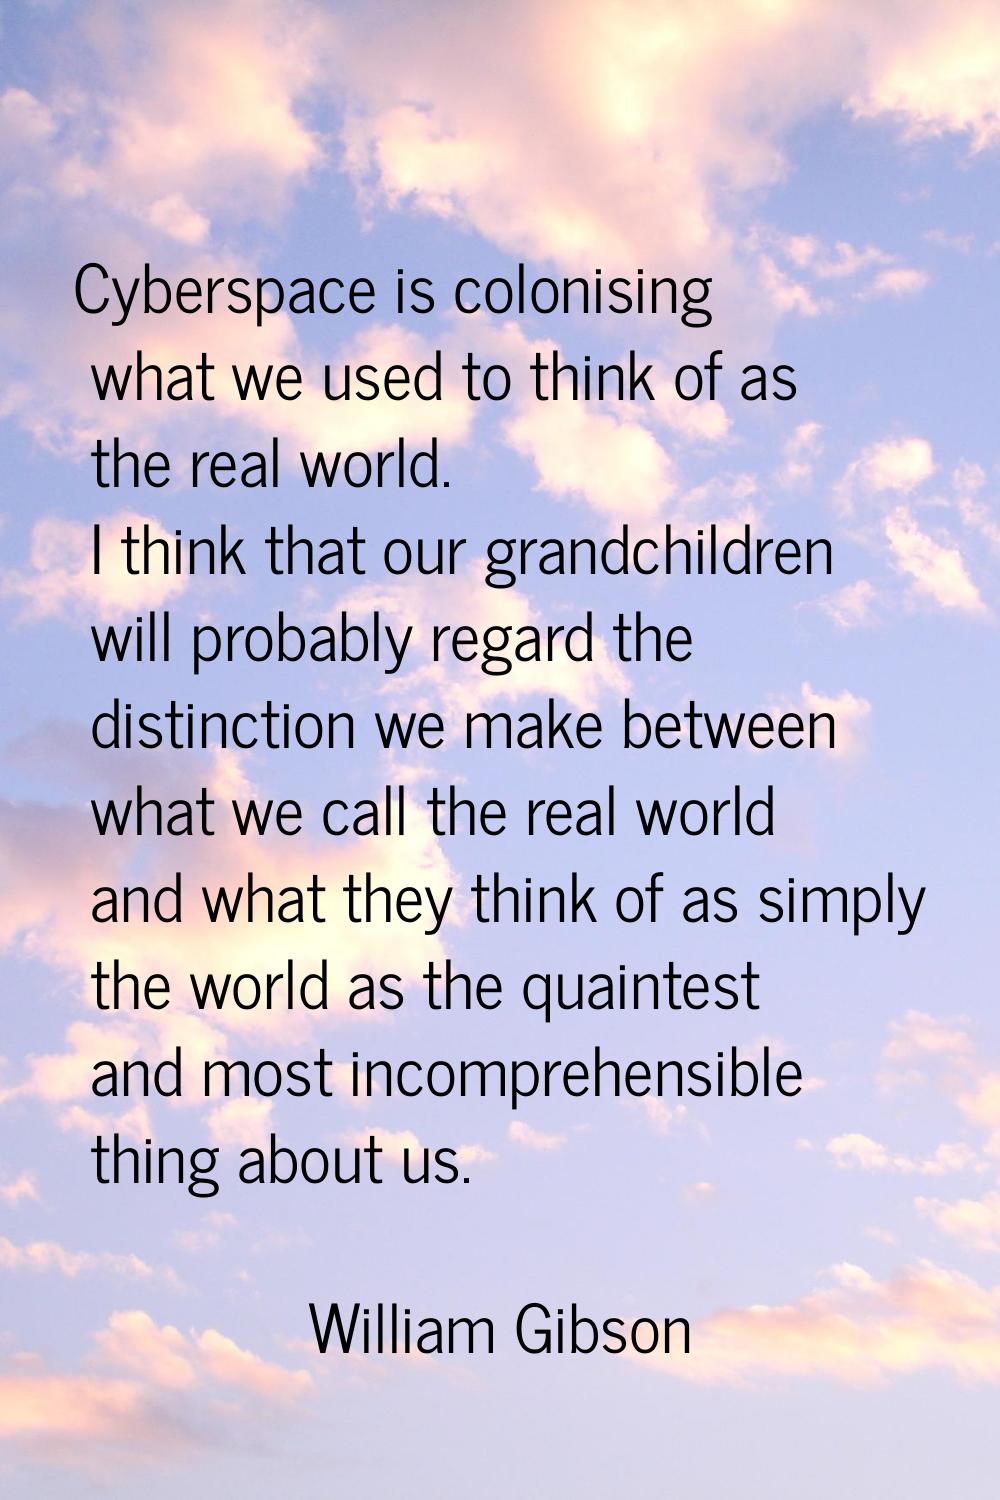 Cyberspace is colonising what we used to think of as the real world. I think that our grandchildren